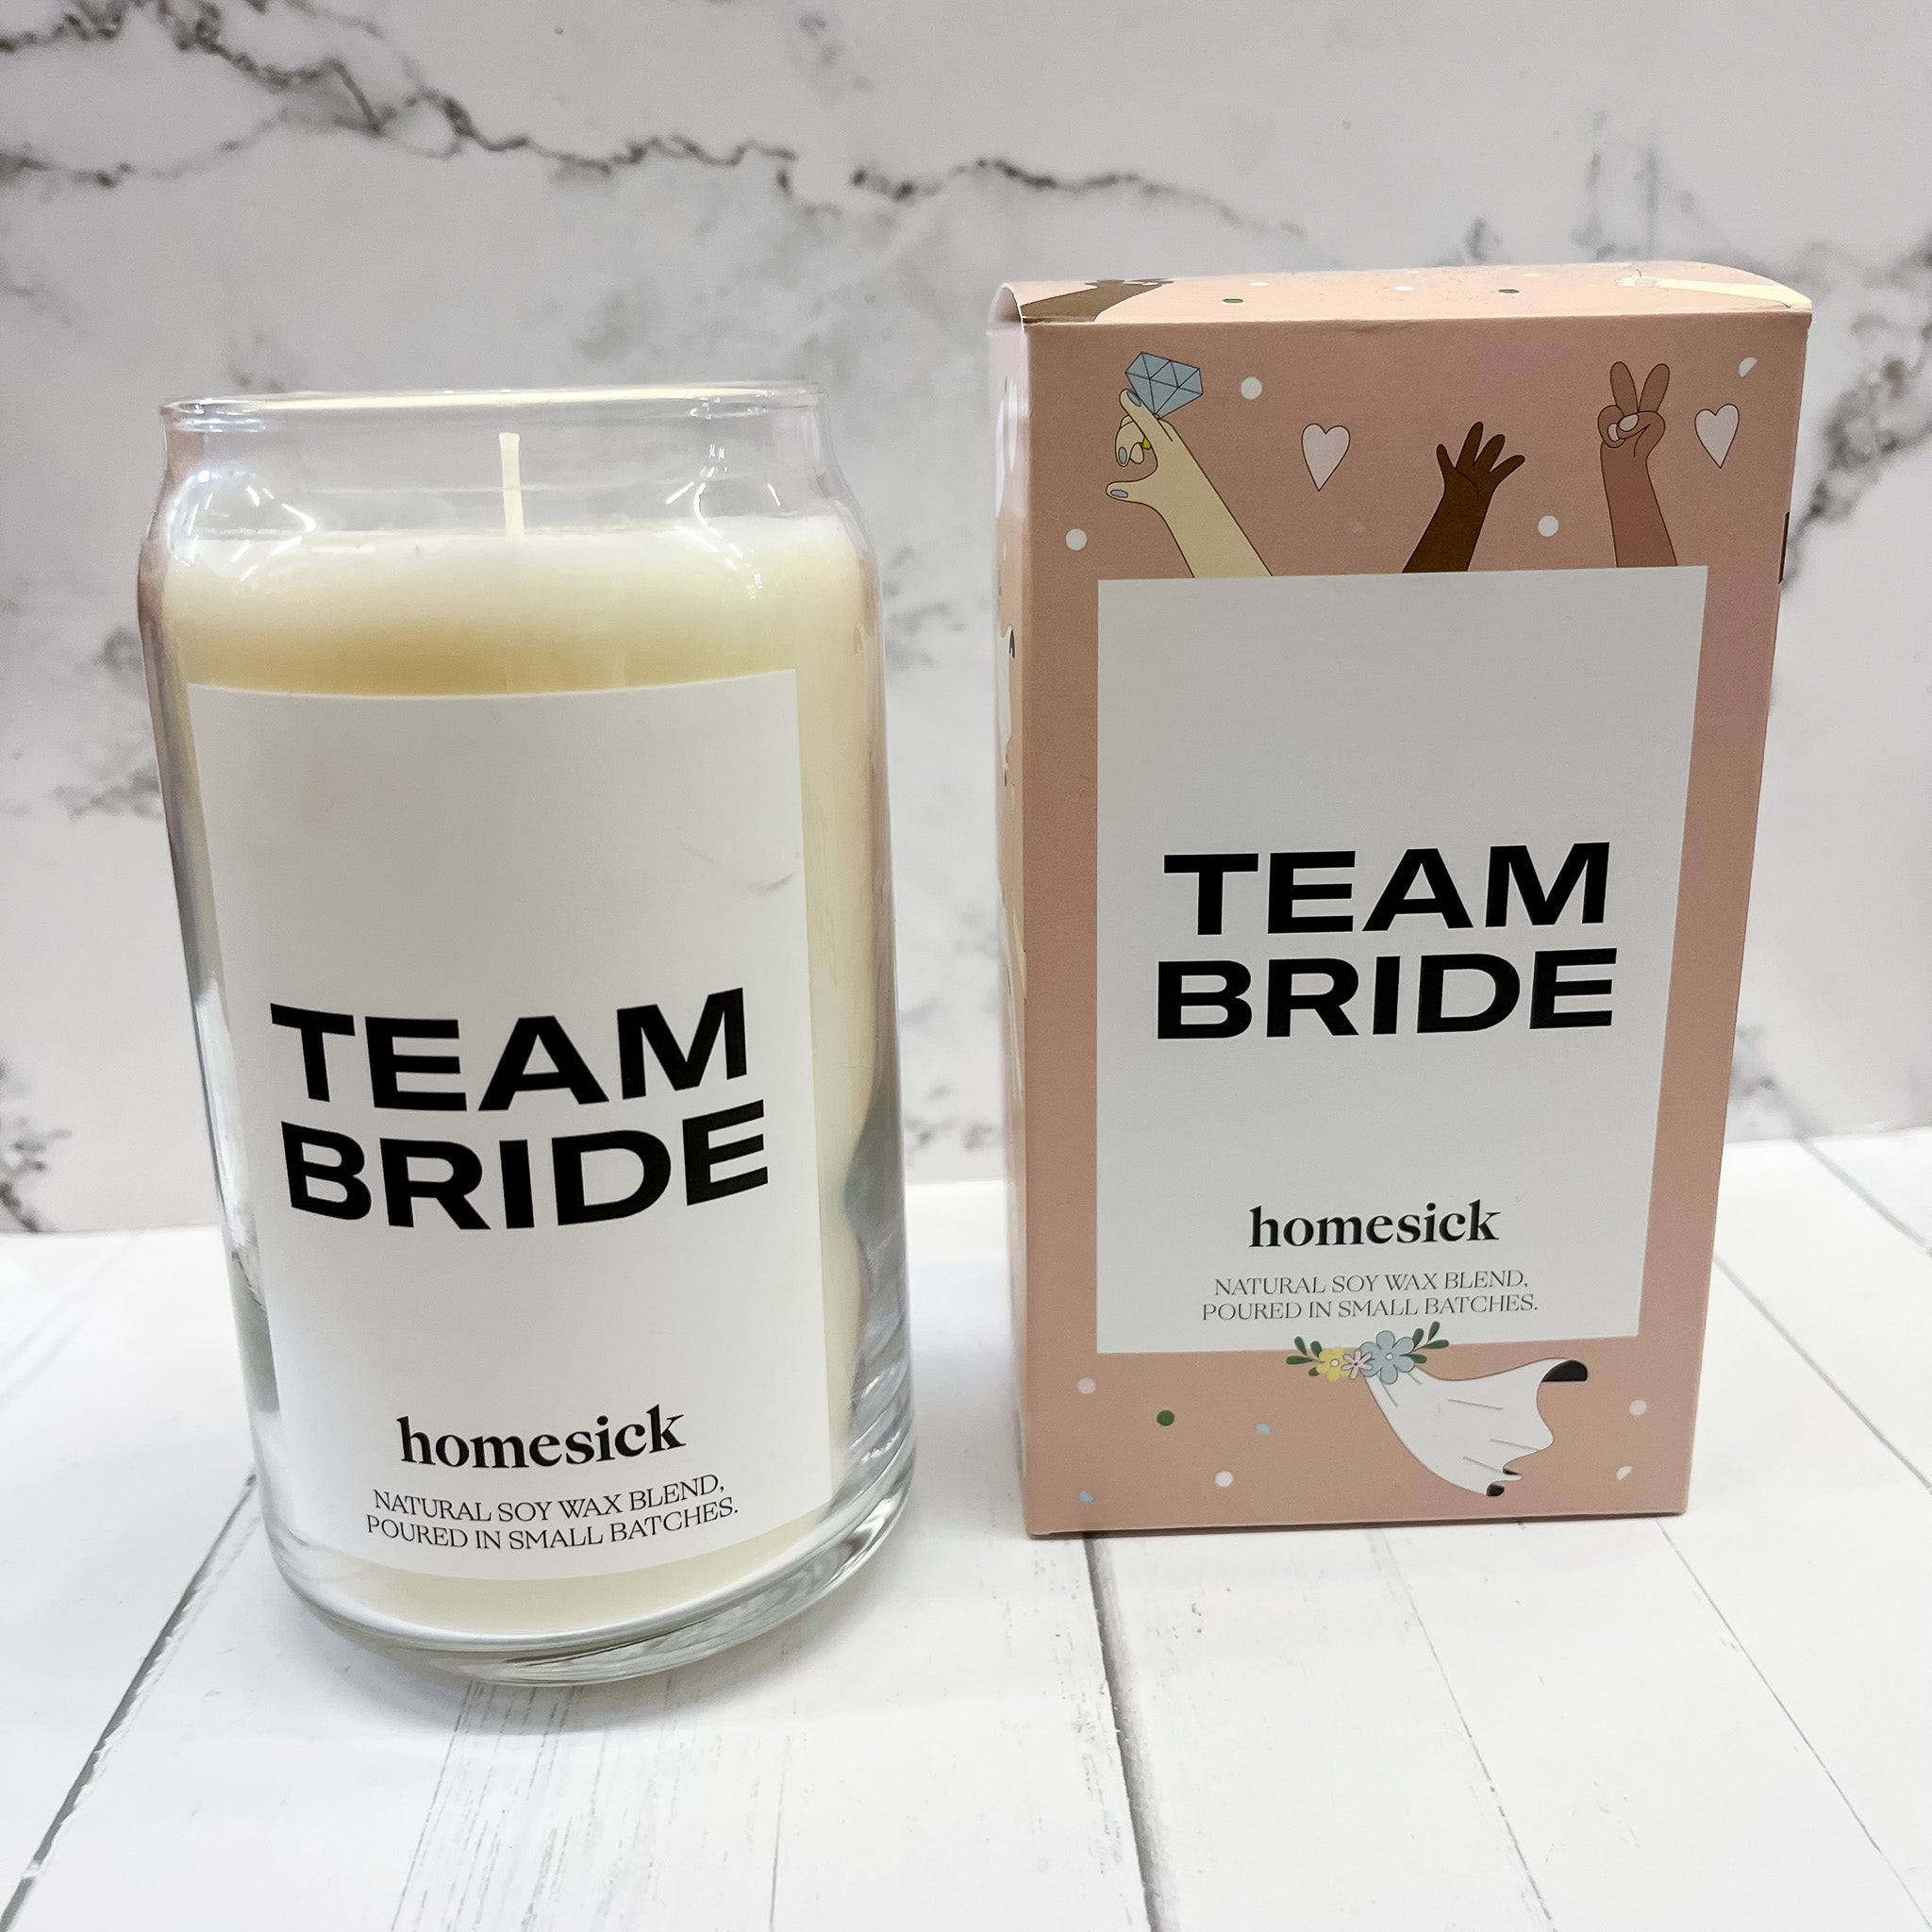 Homesick Candle | Let's Toast